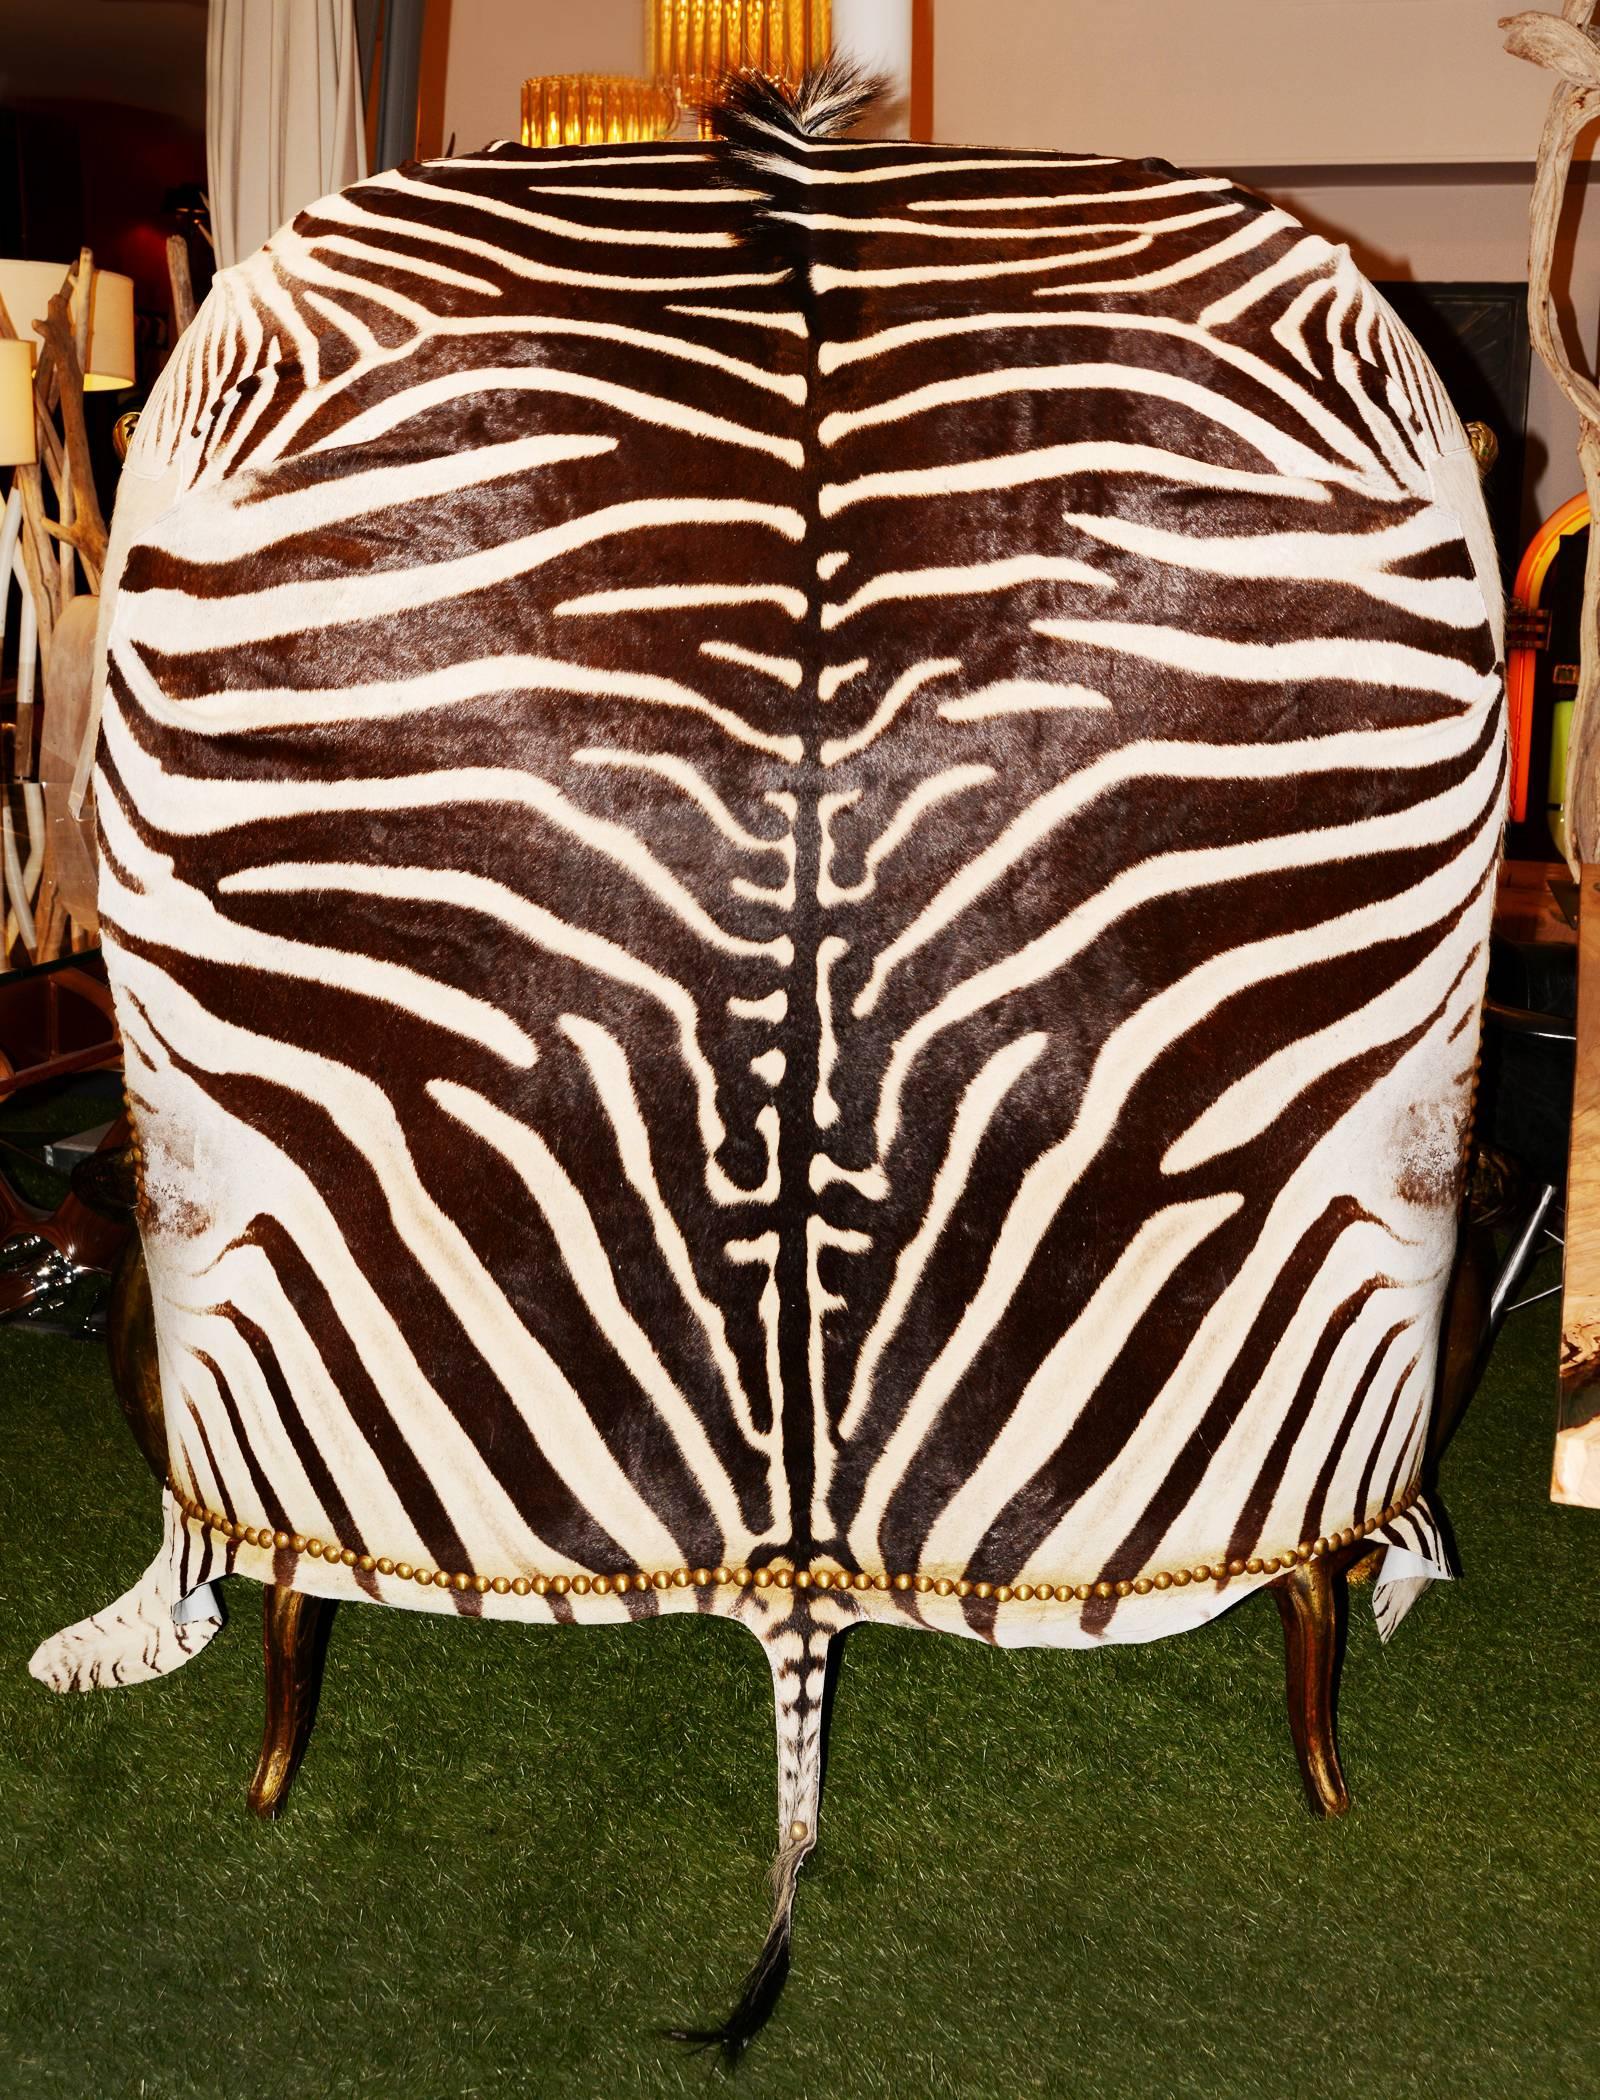 Contemporary Grand Zebra Two-Seat Sofa with Zebra Skin and Real Horns